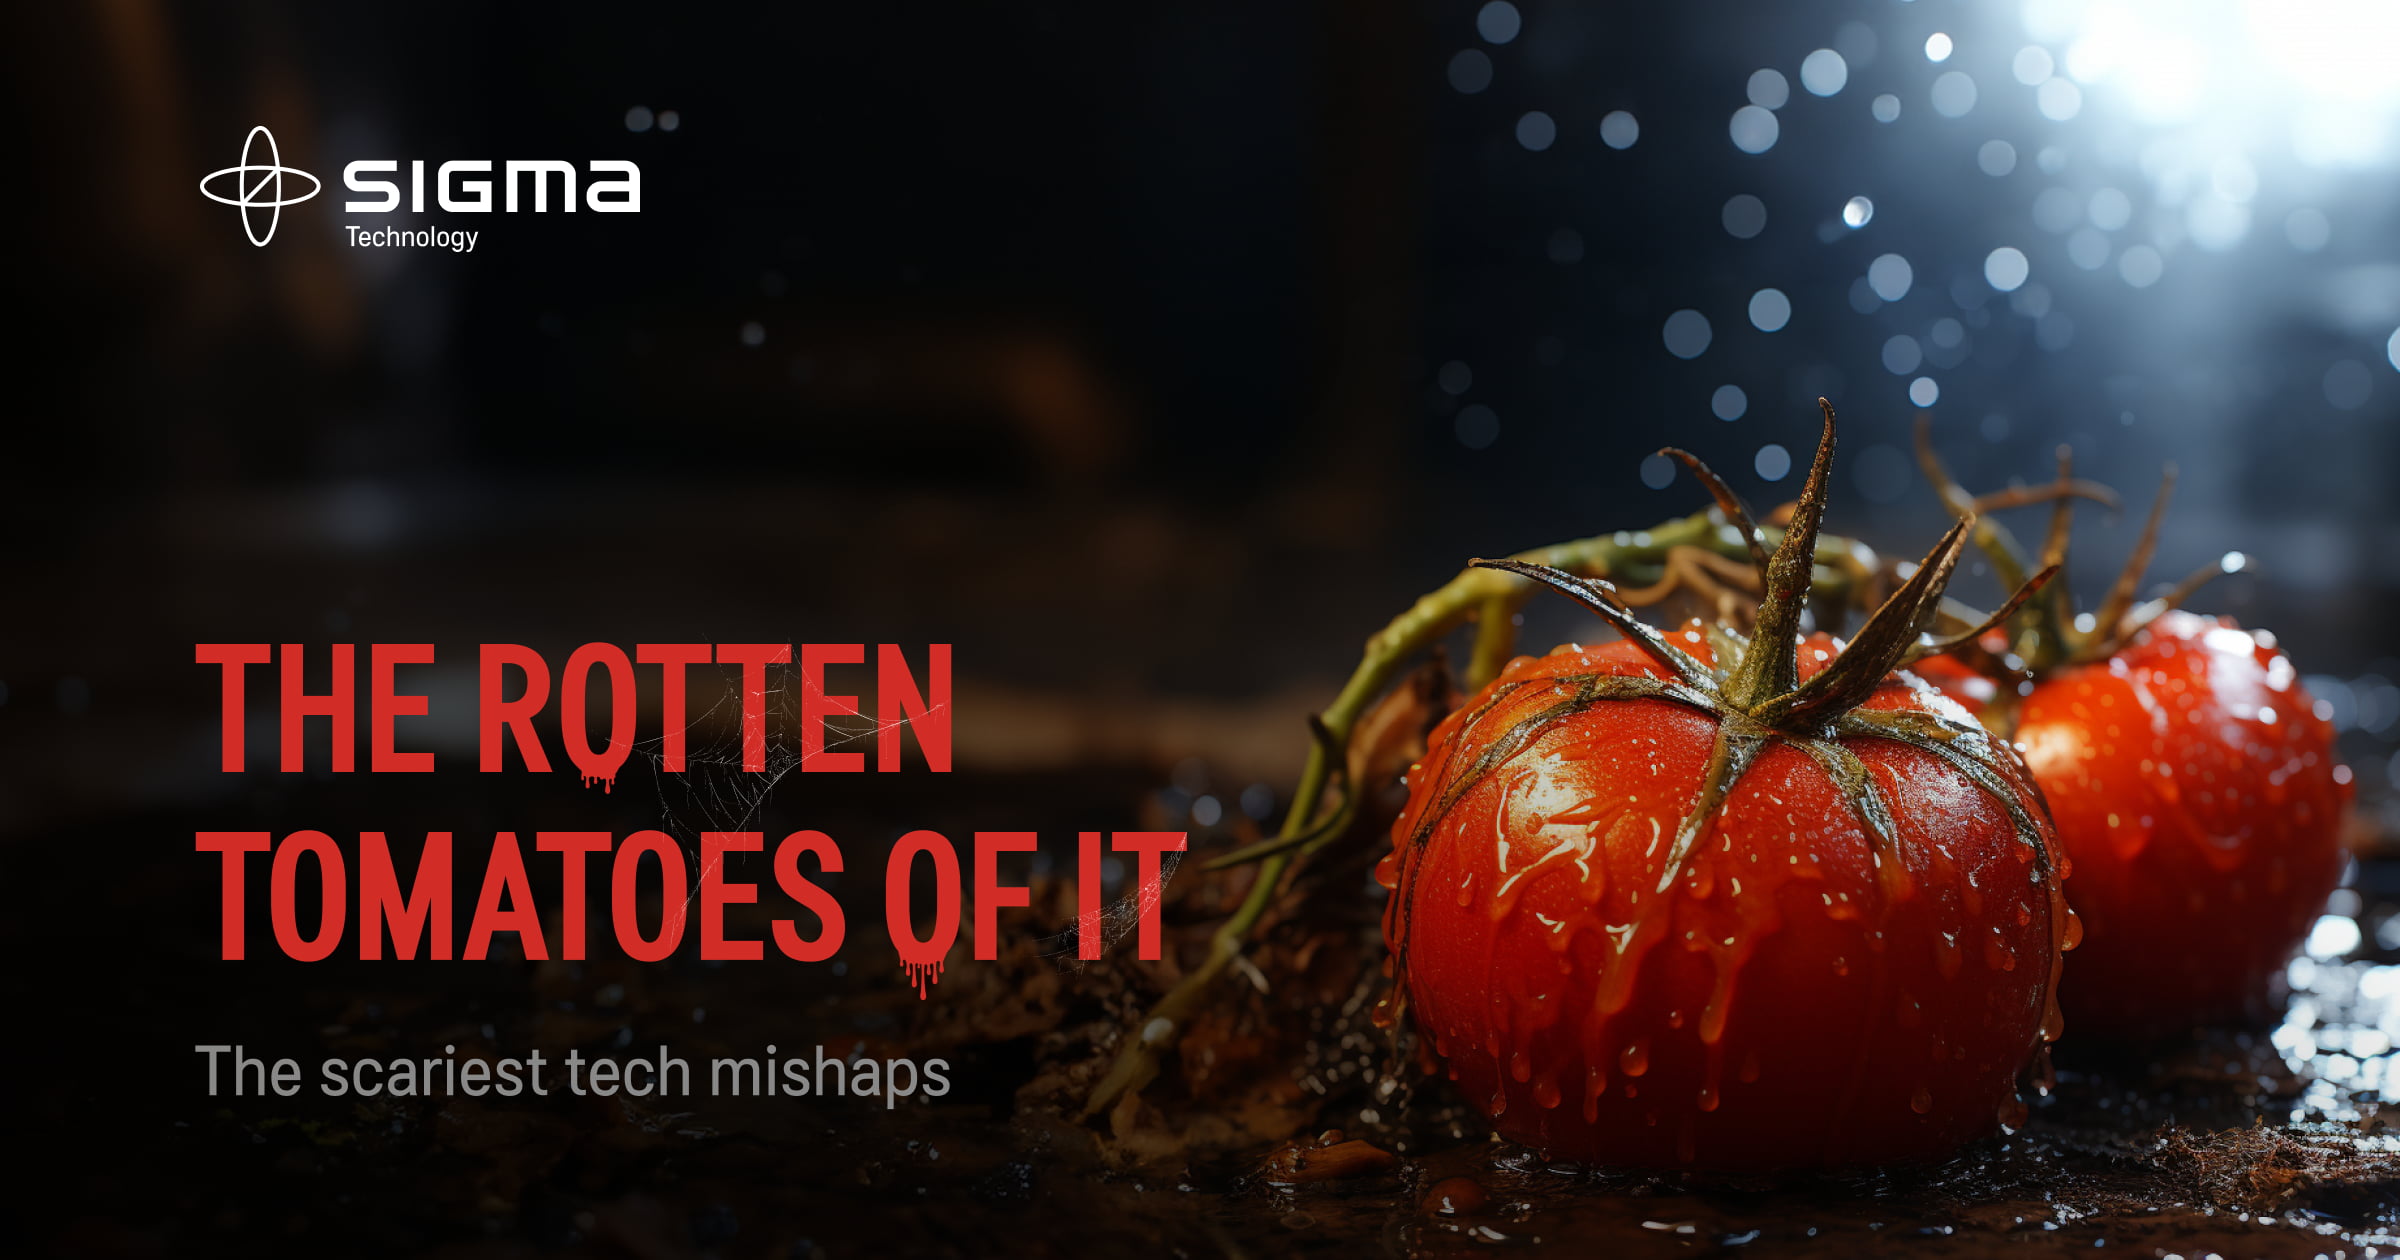 The Rotten Tomatoes of IT - Tech Horror Stories by Sigma Technology